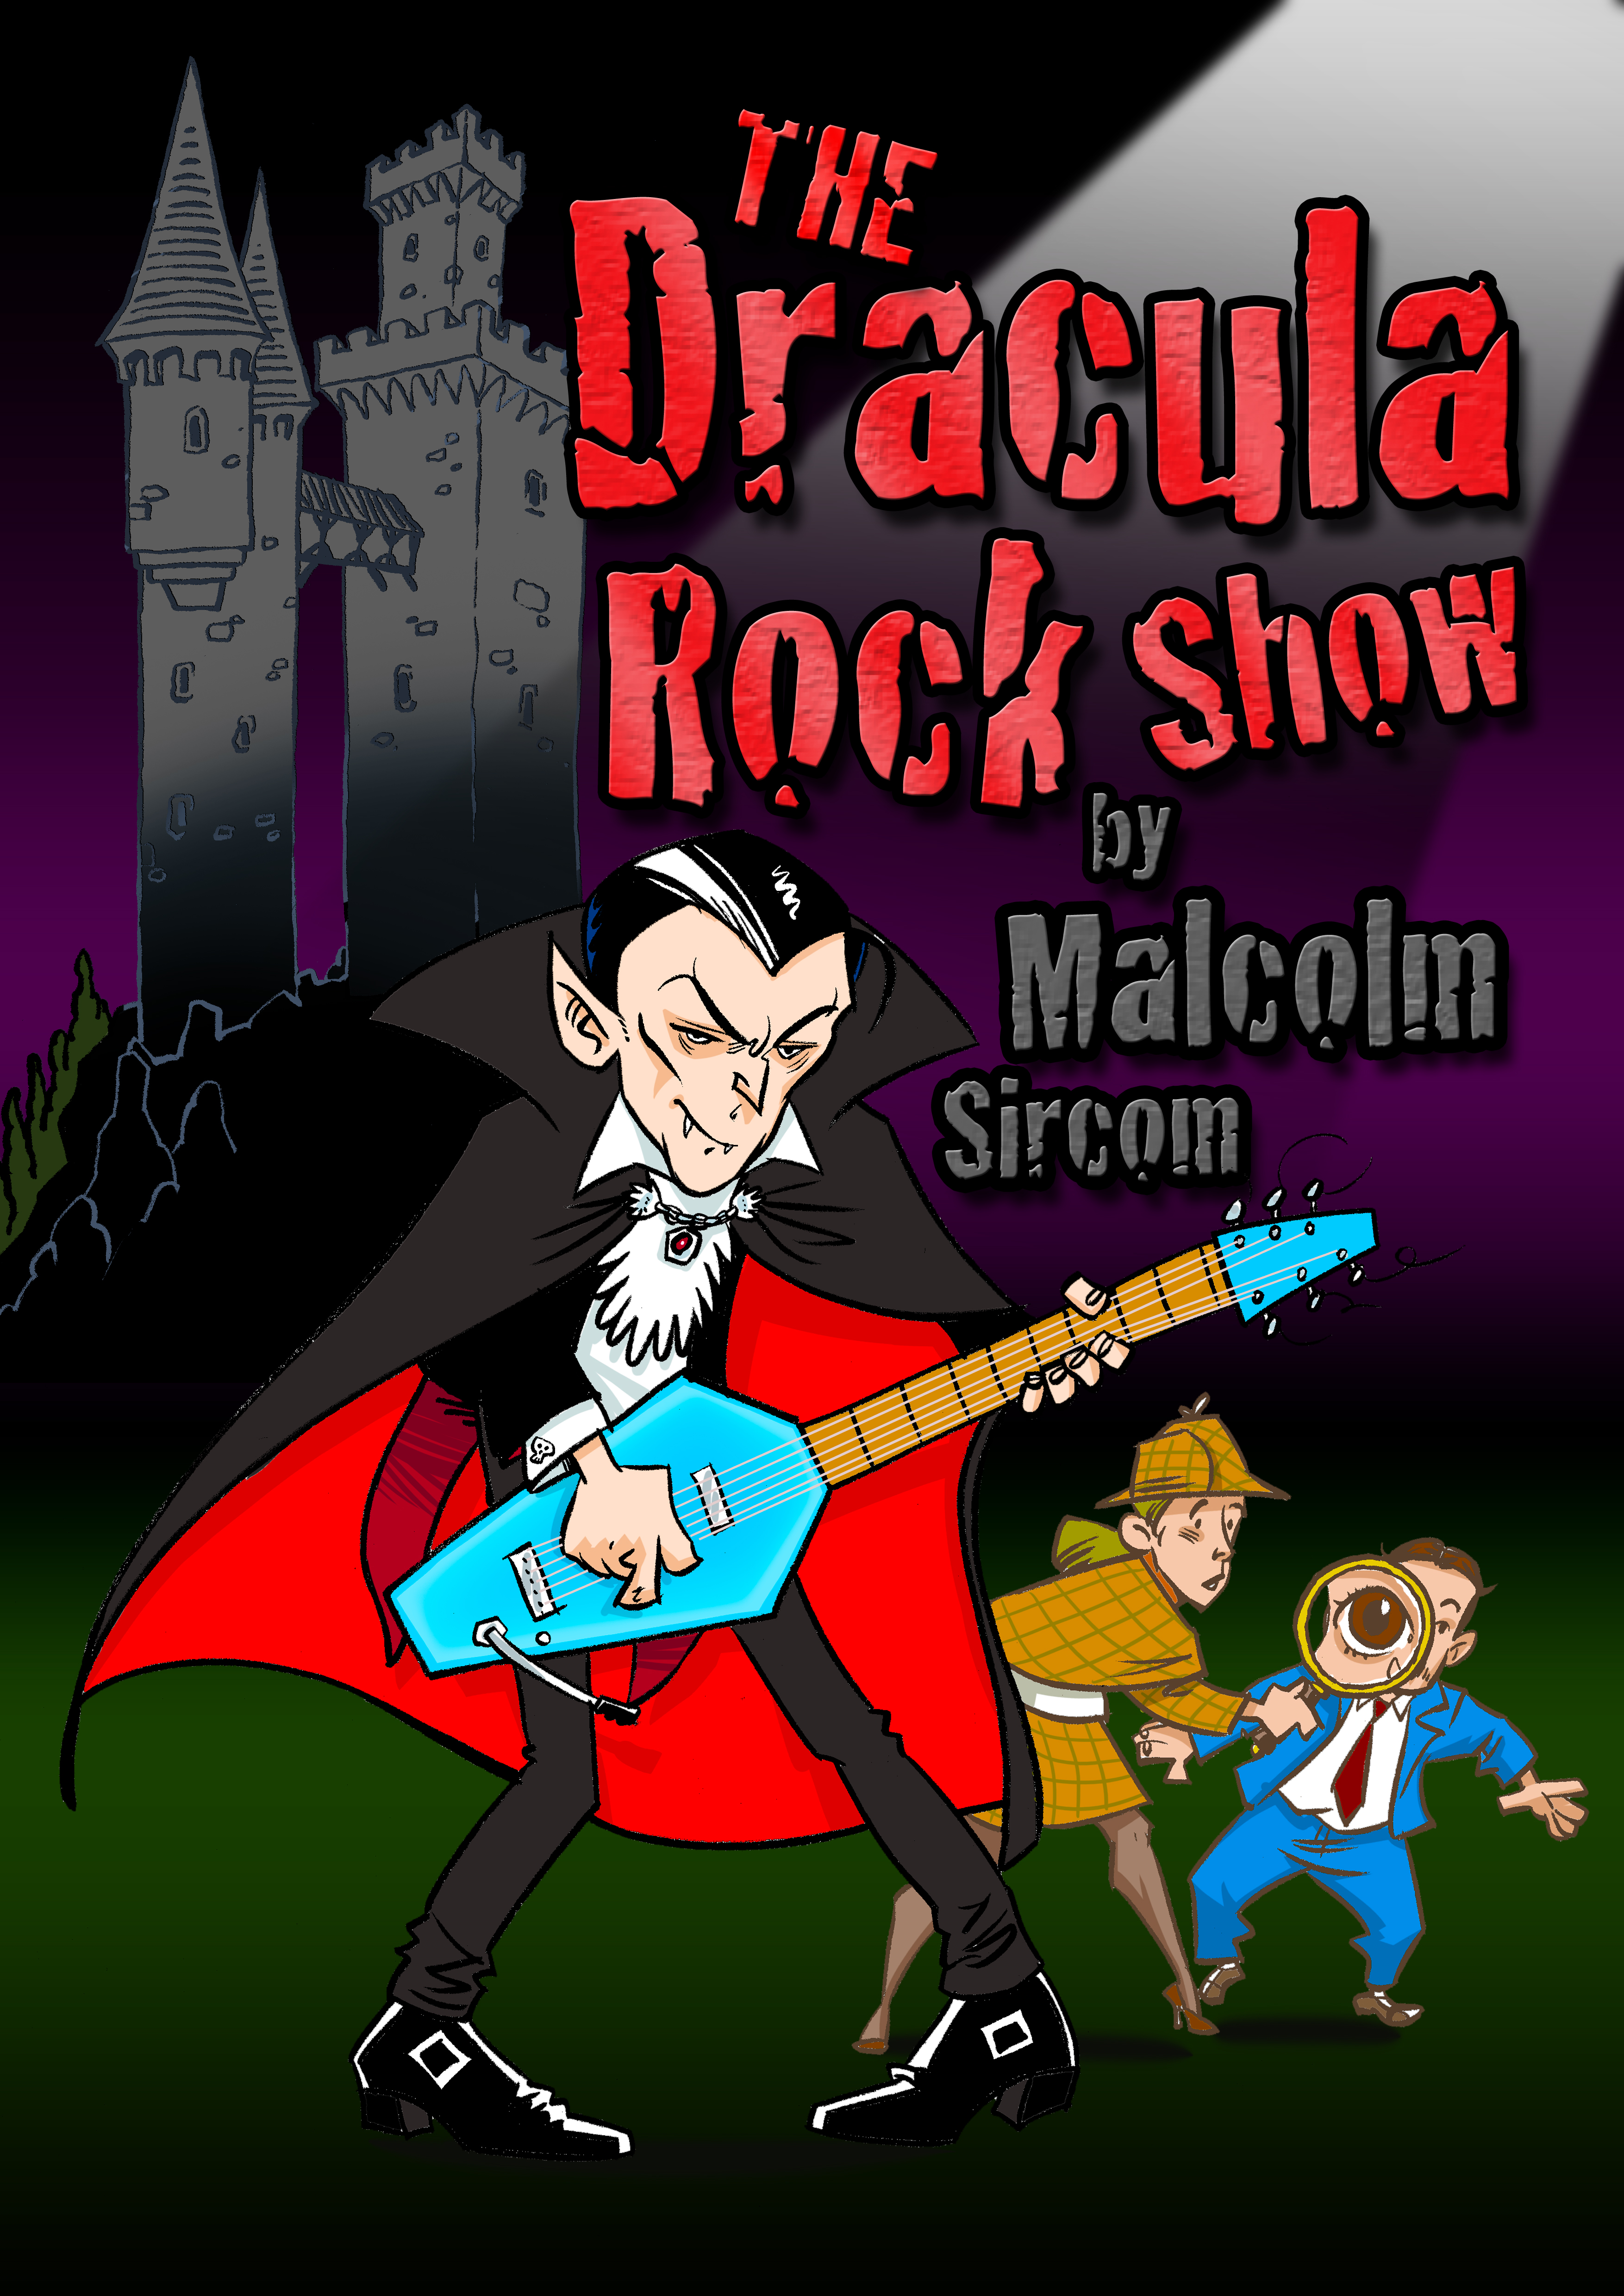 Dracula for Kids - Play Scripts